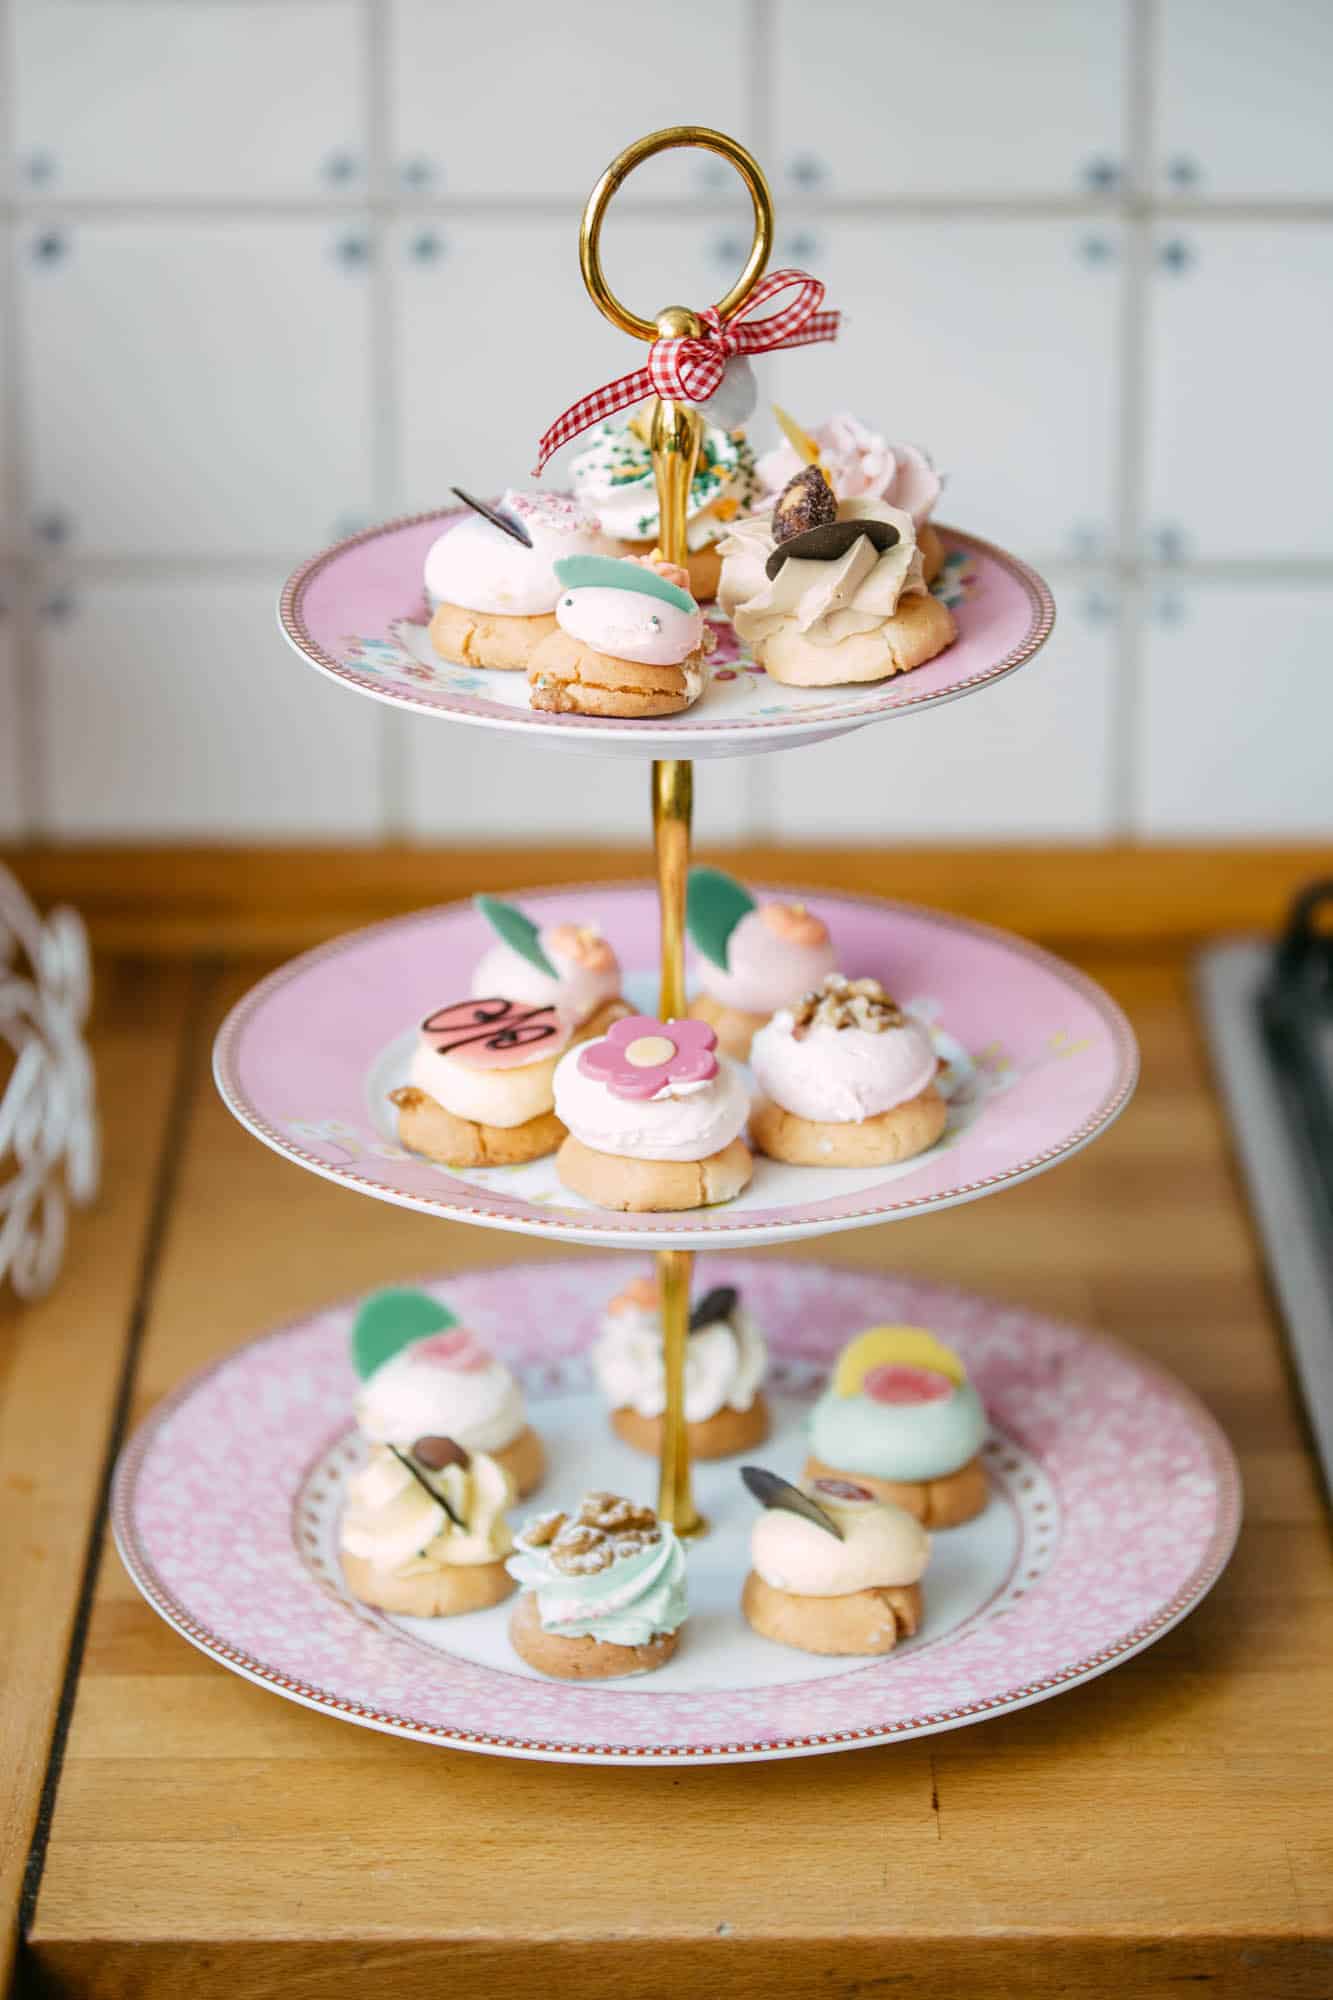 A three-tier cake tray decorated with delicious cupcakes, perfect for displaying beautiful wedding cakes.